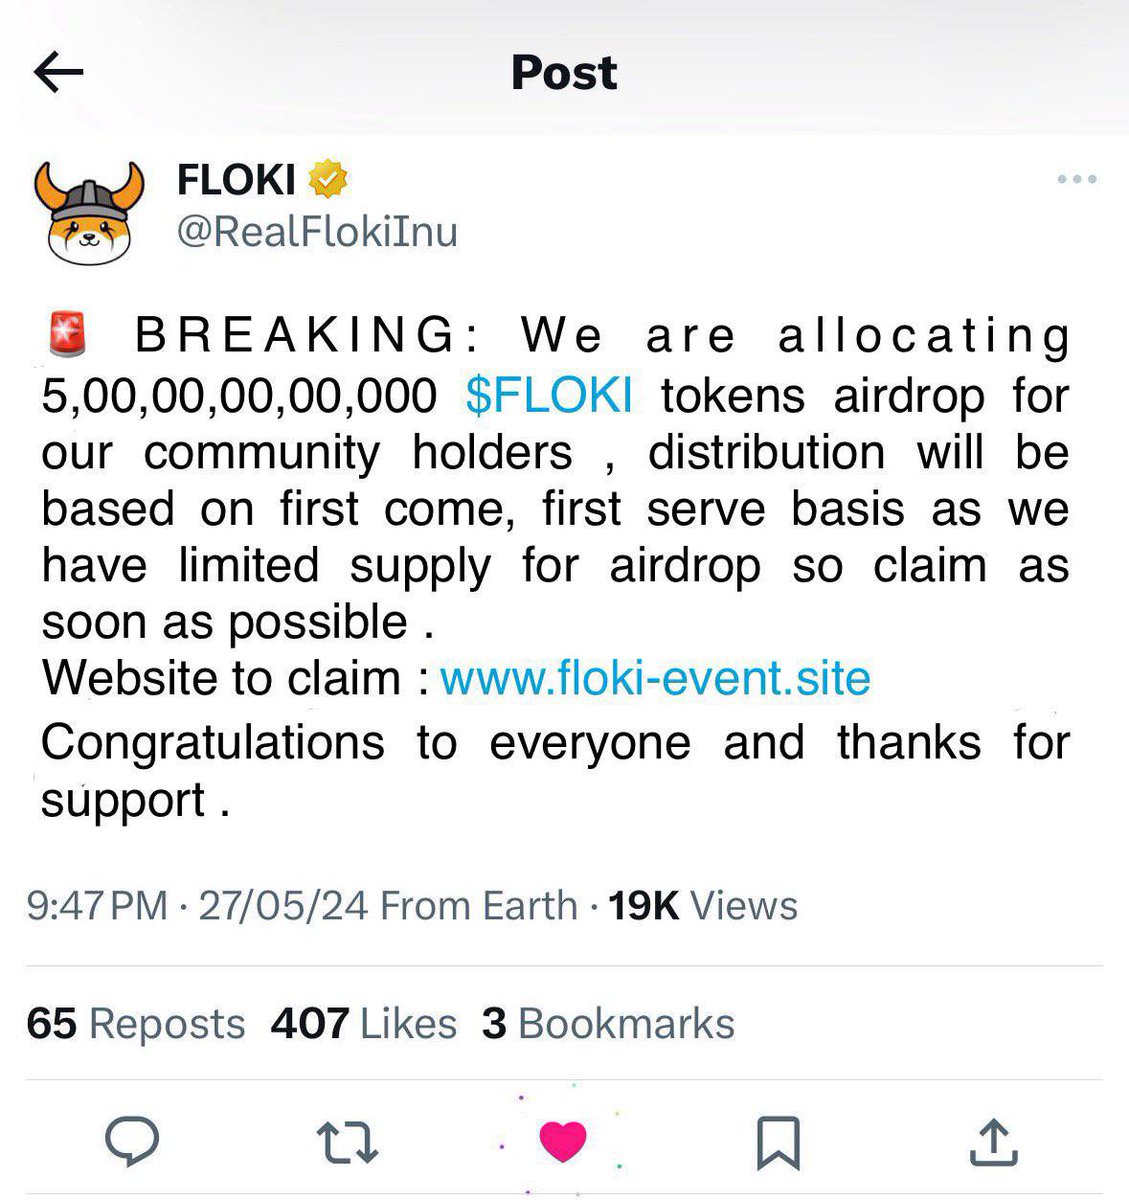 Breaking 🚨🚨 🤩🤩🤩
received 30,00,00,00  $FLOKI TOKENS from their airdrop on Twitter announcement 🥳
🤑🤑 massive don’t be late 

#Floki #crypto #binance                #solana #sol #bnb                #nft #BAYC #trump #czbinance #BITCOIN          #eth #uniswap